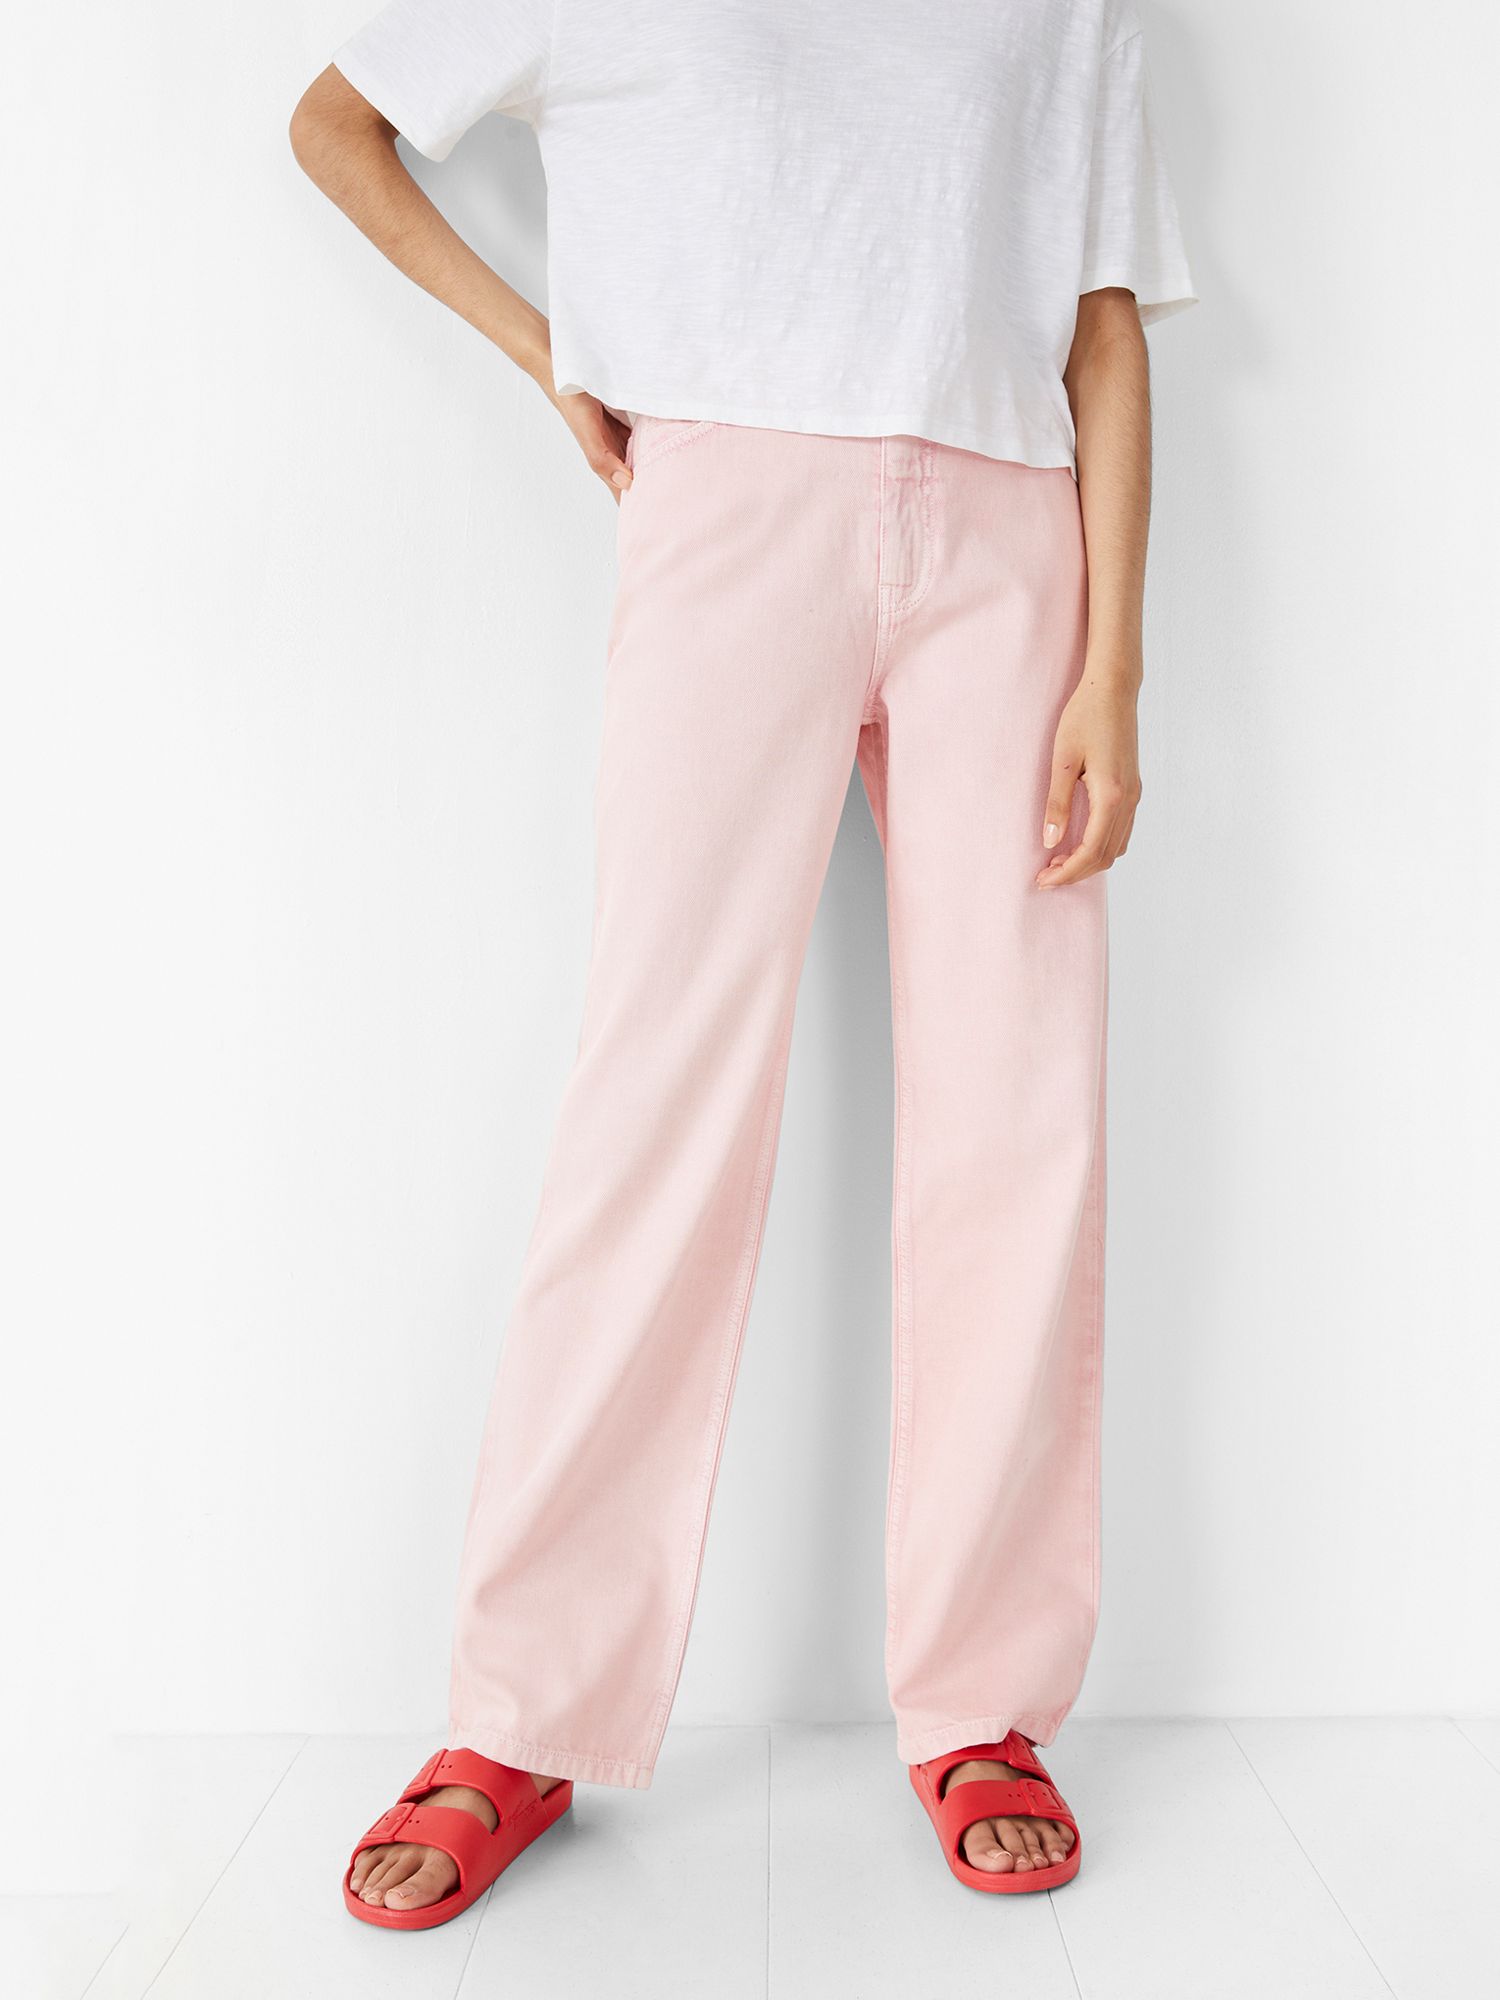 Hot Pink Slouch Pants